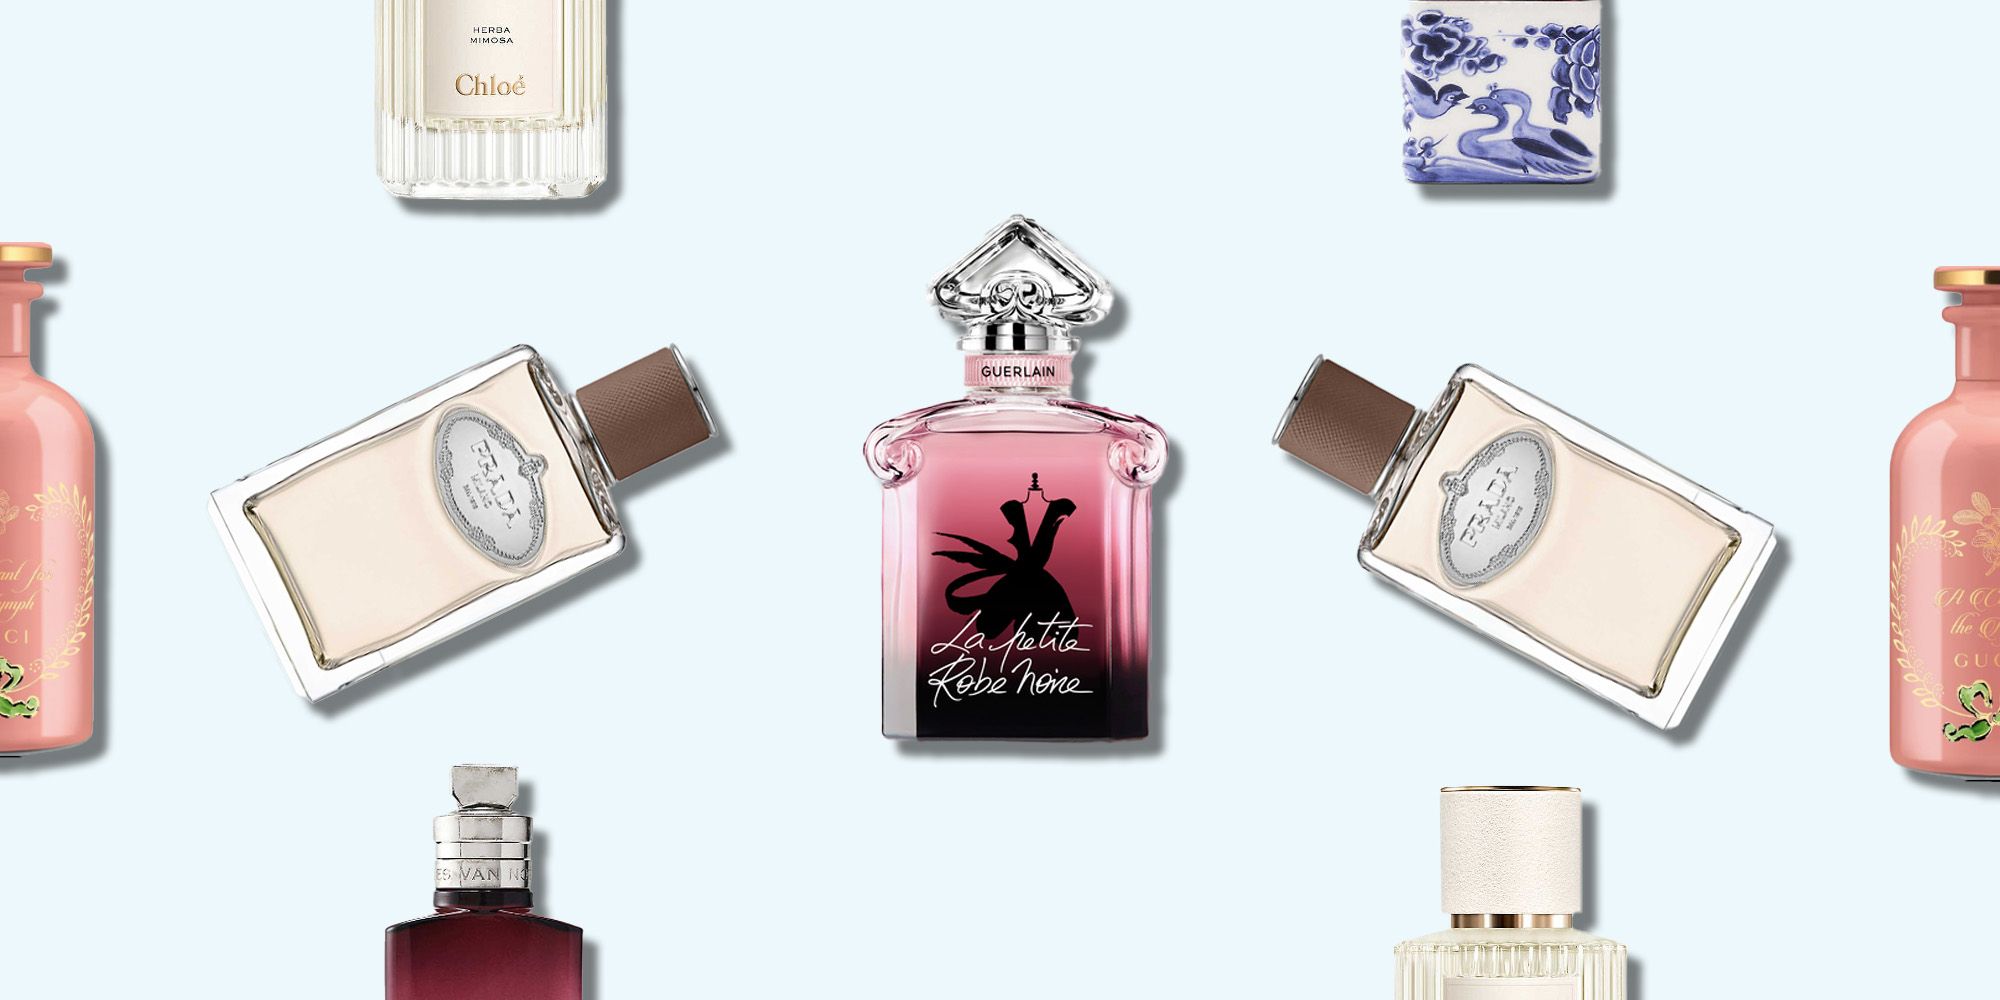 Comforting Fragrances for Cold Winter Days - The New York Times